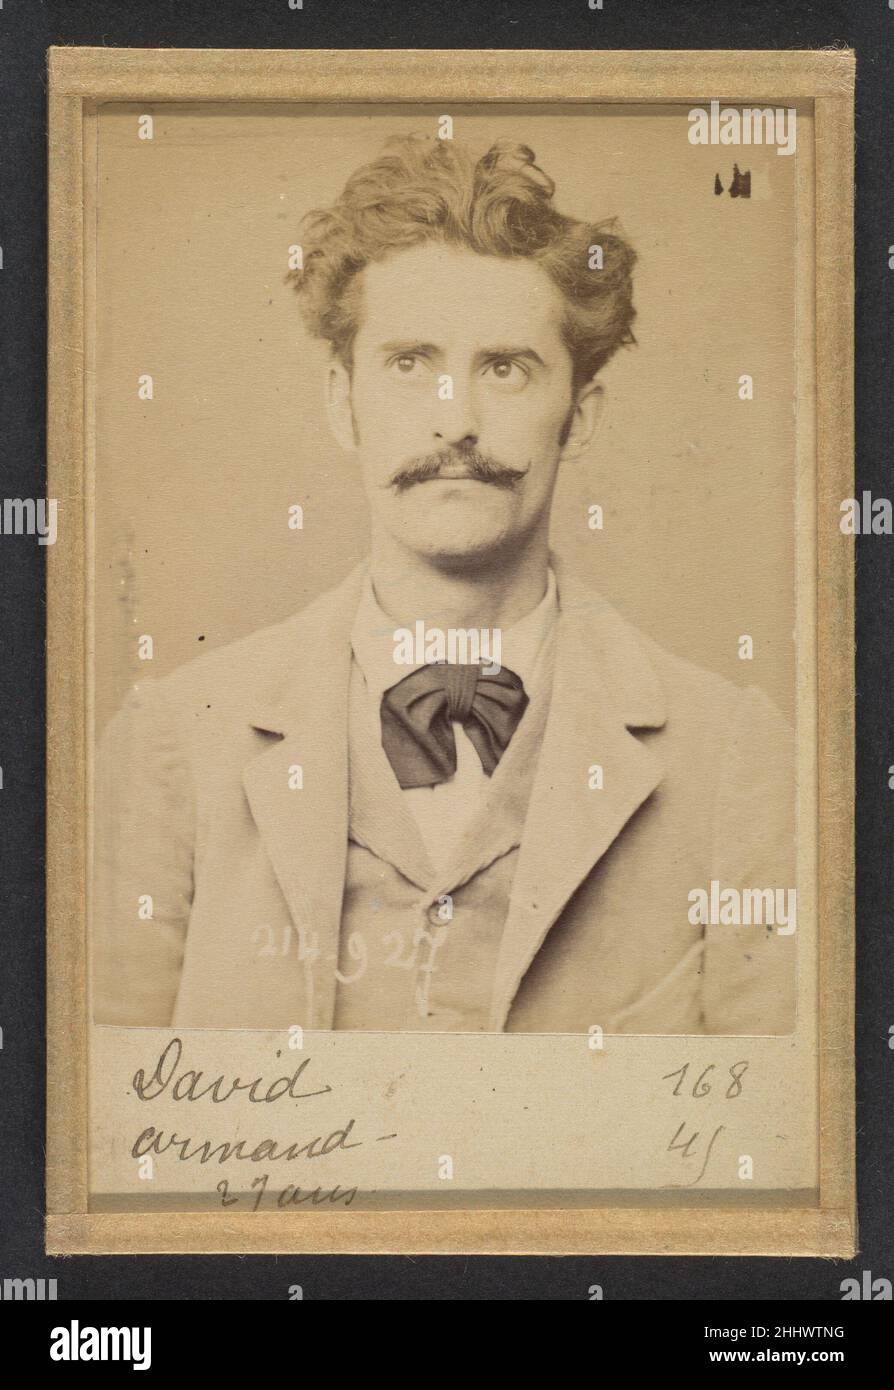 David. Armand, Auguste. 27 ans, né à Gien (Loiret). Faïencier. Anarchiste. 1/3/94. 1894 Alphonse Bertillon Born into a distinguished family of scientists and statisticians, Bertillon began his career as a clerk in the Identification Bureau of the Paris Prefecture of Police in 1879. Tasked with maintaining reliable police records of offenders, he developed the first modern system of criminal identification. The system, which became known as Bertillonage, had three components: anthropometric measurement, precise verbal description of the prisoner’s physical characteristics, and standardized phot Stock Photo